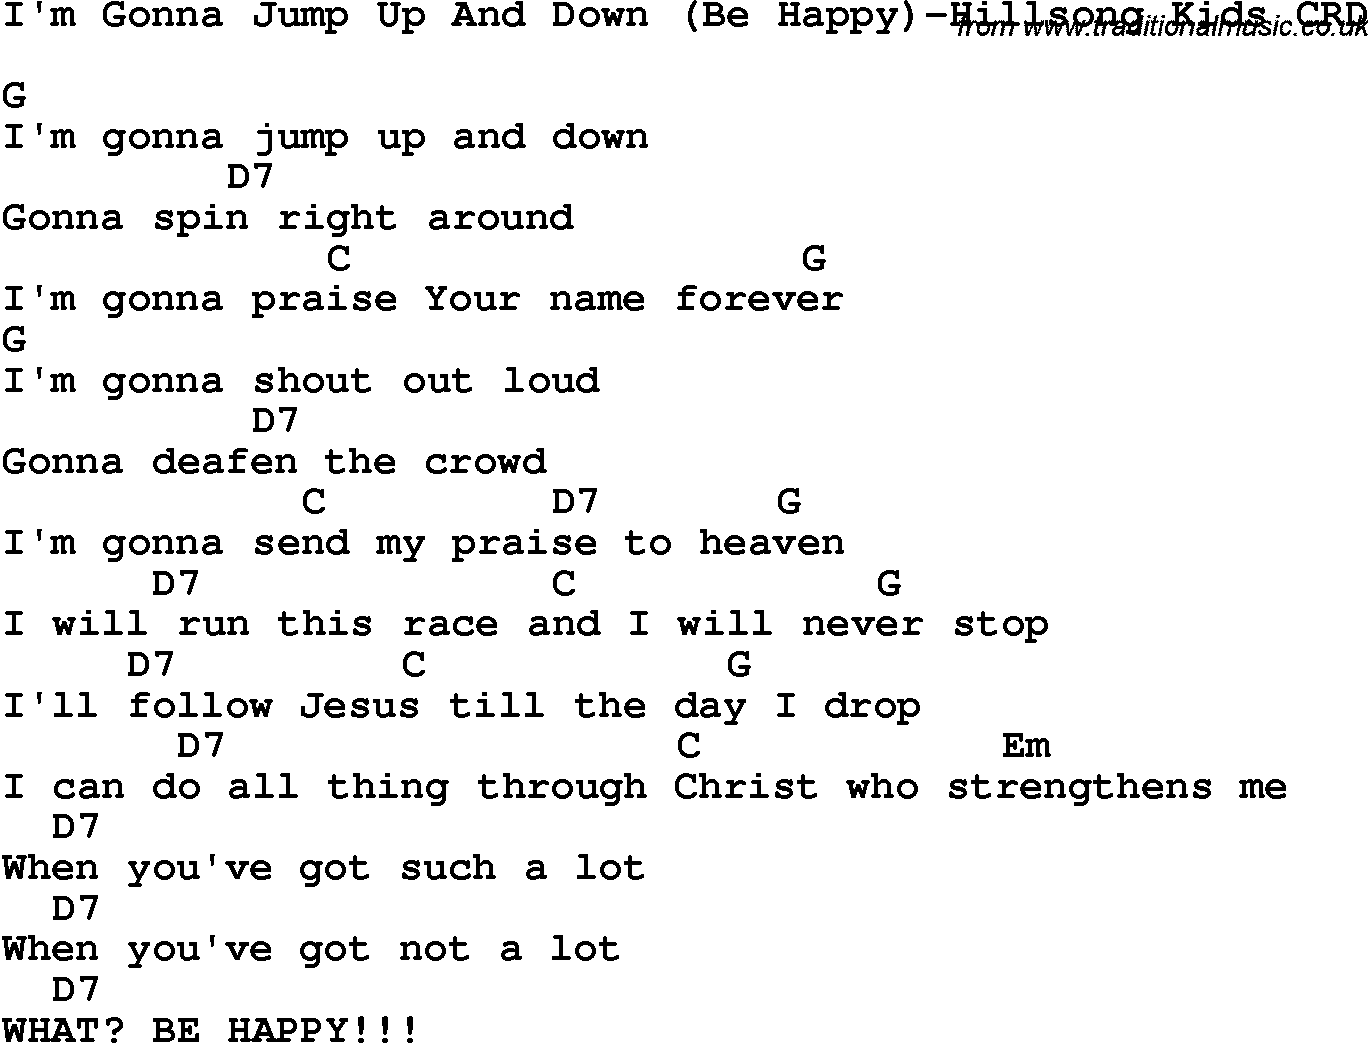 Christian Chlidrens Song I'm Gonna Jump Up And Down Be Happy-Hillsong Kids CRD Lyrics & Chords